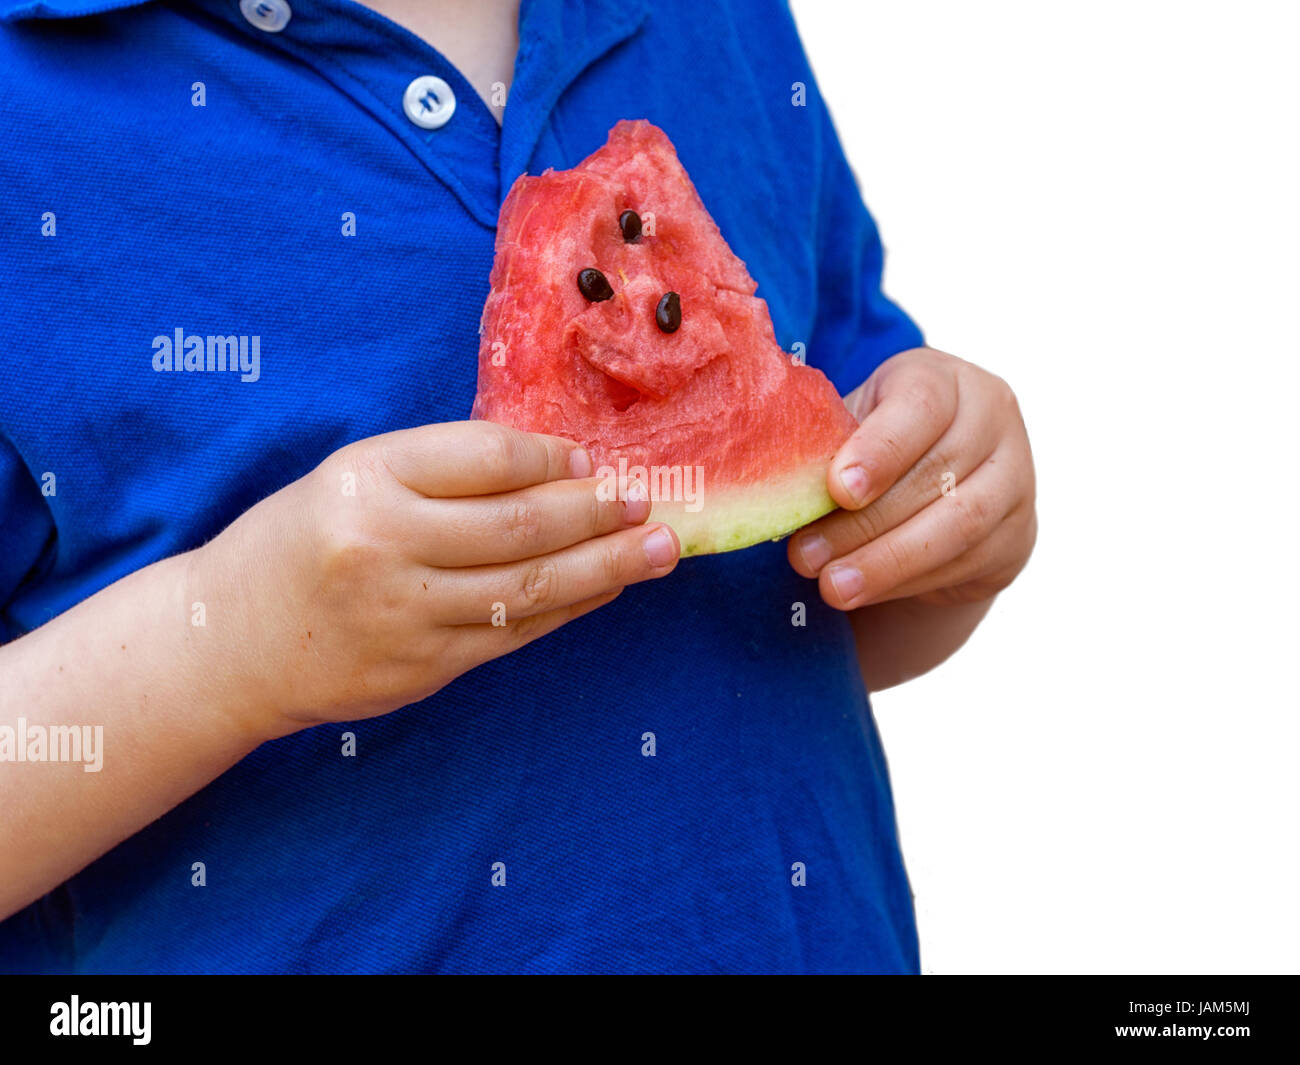 Small boy, rather plump, eating watermelon. Healthy childhood concept. White background. Stock Photo